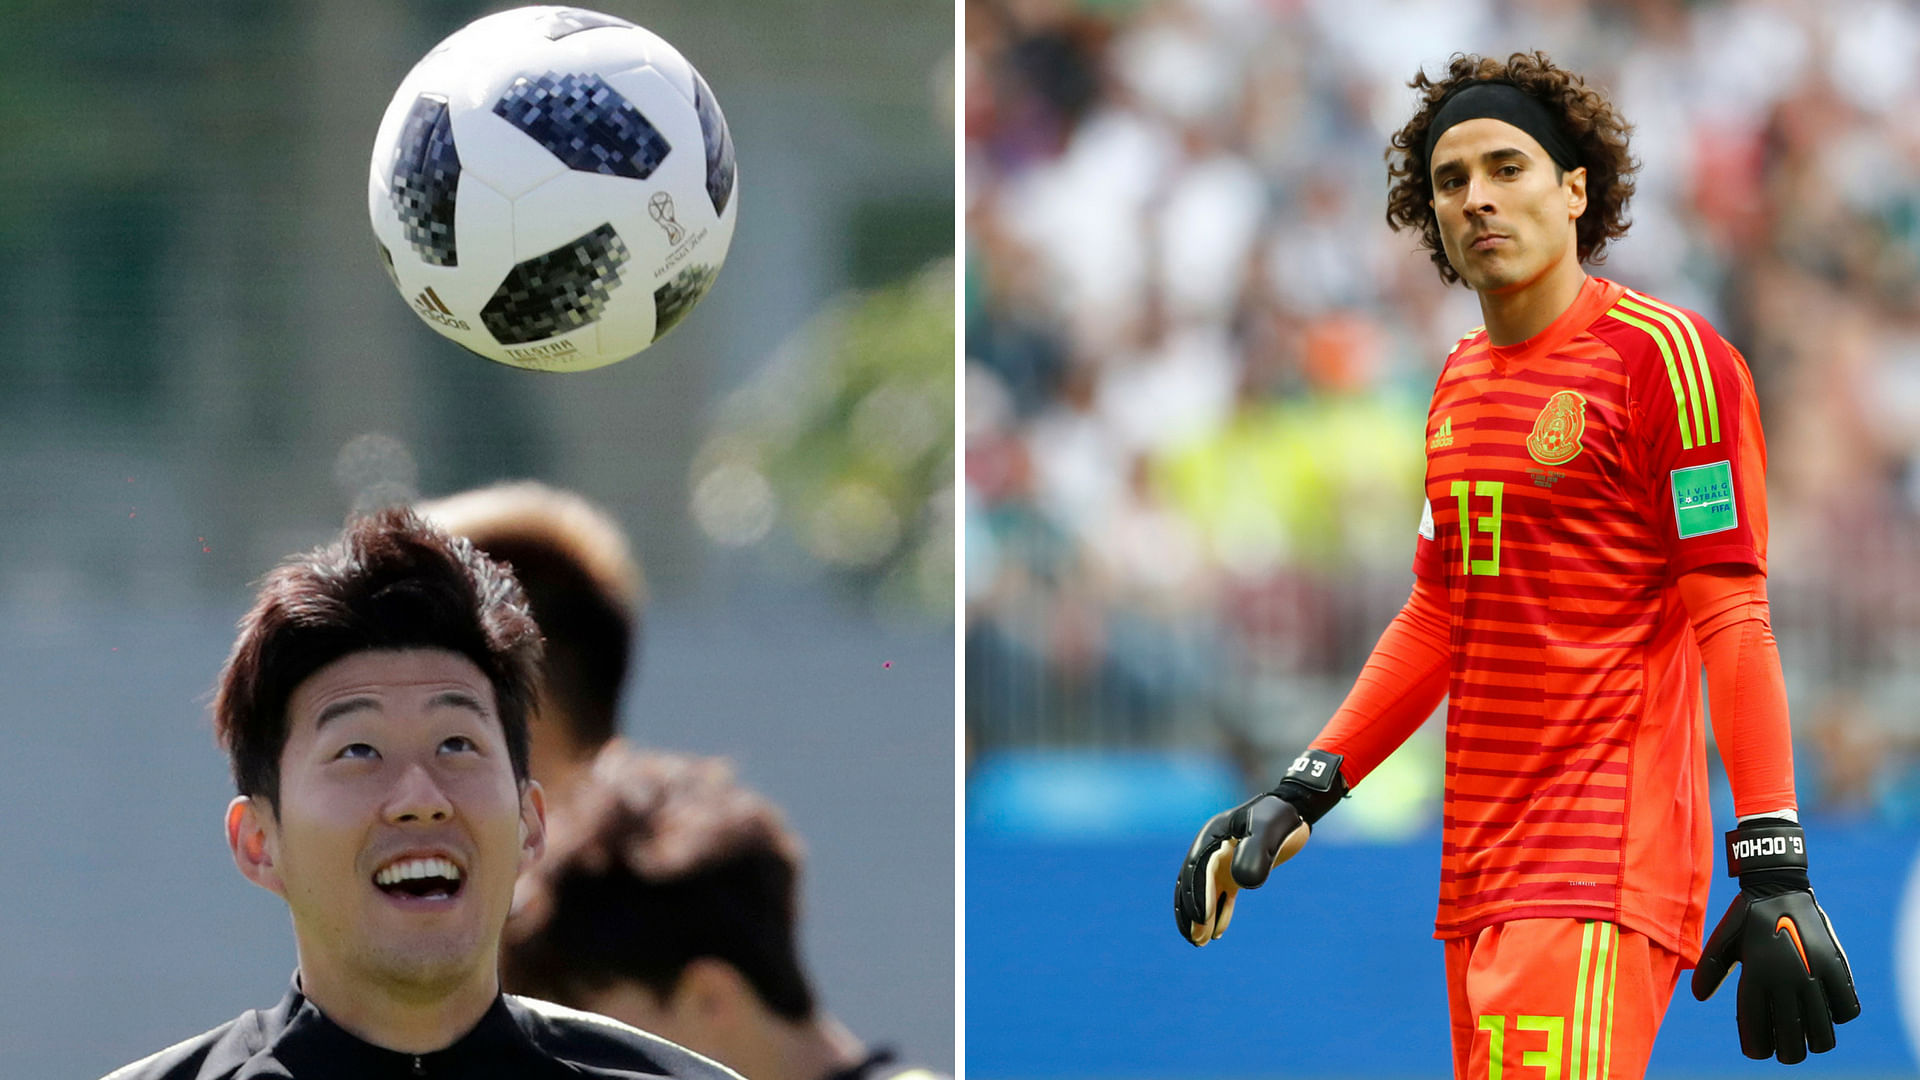 Striker Son Heung-min, considered a generational talent, will have a hard time breaching the defences of Guillermo Ochoa.